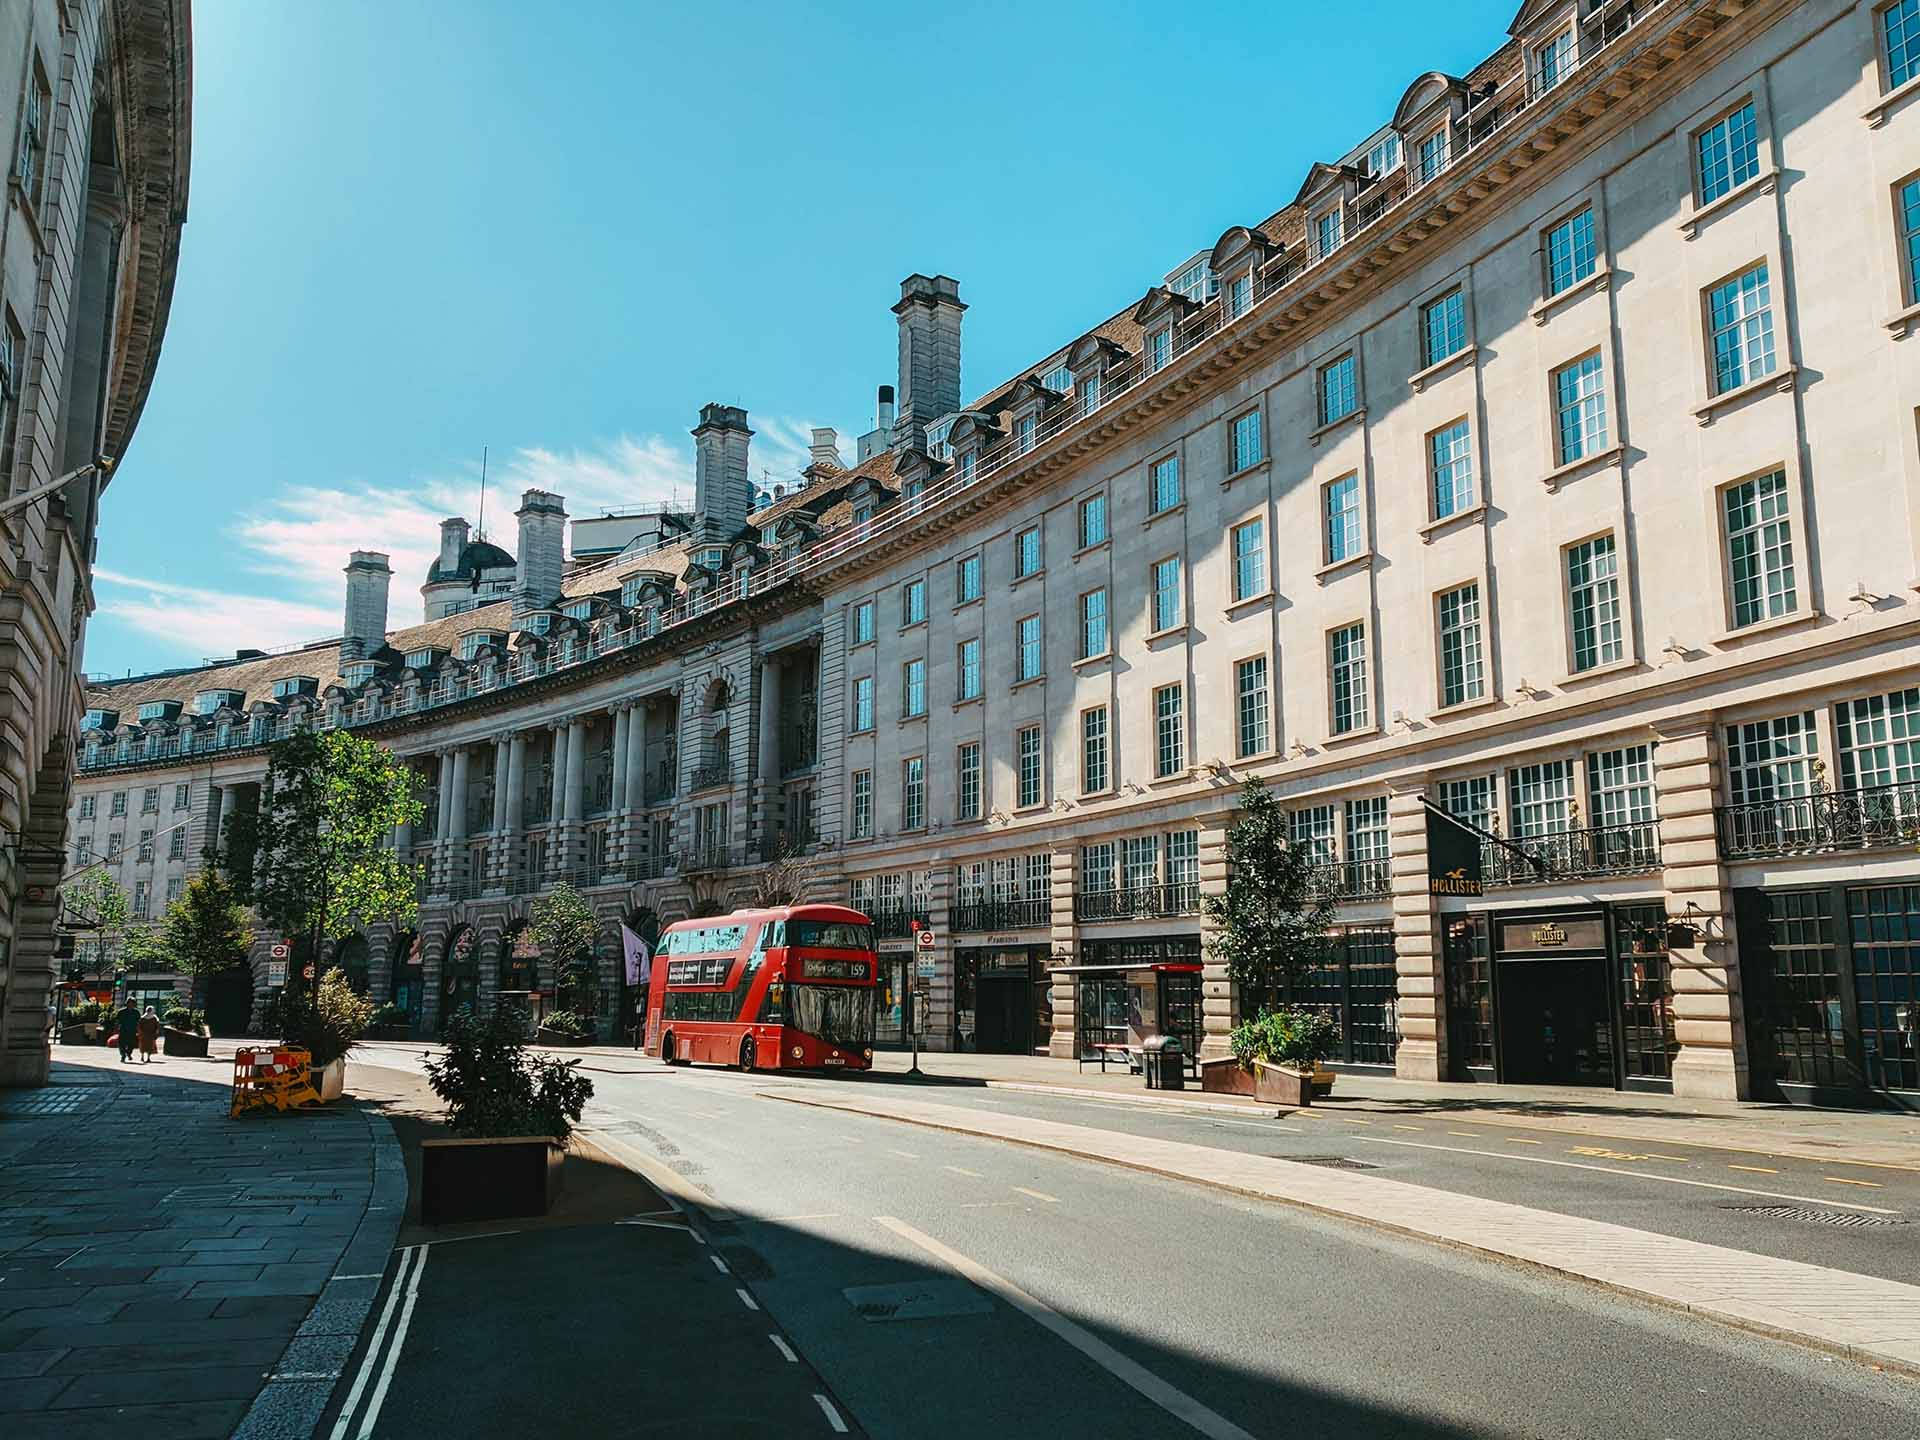 Mayfair Offices: Choosing you Ideal Location